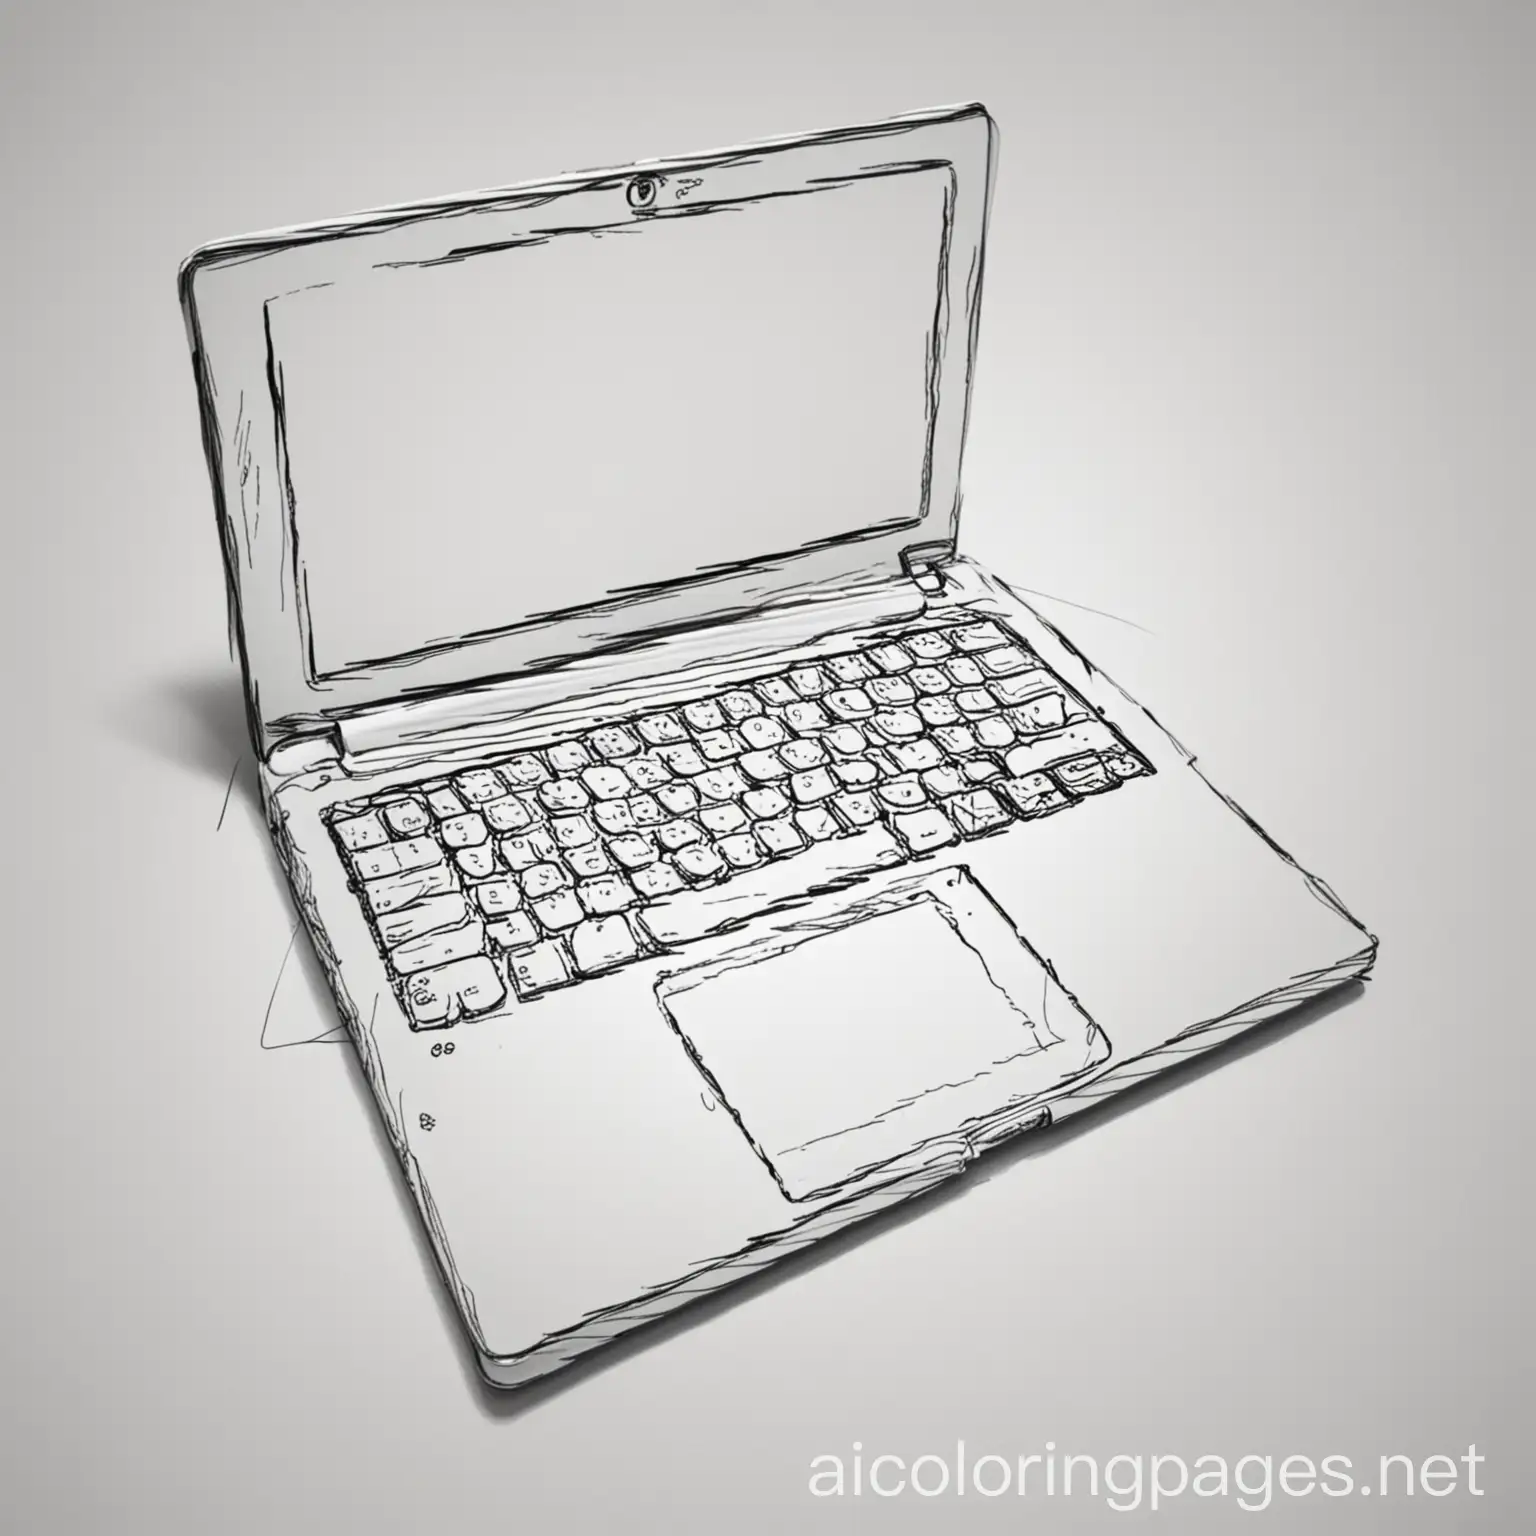 laptop, Coloring Page, black and white, line art, white background, Simplicity, Ample White Space. The background of the coloring page is plain white to make it easy for young children to color within the lines. The outlines of all the subjects are easy to distinguish, making it simple for kids to color without too much difficulty